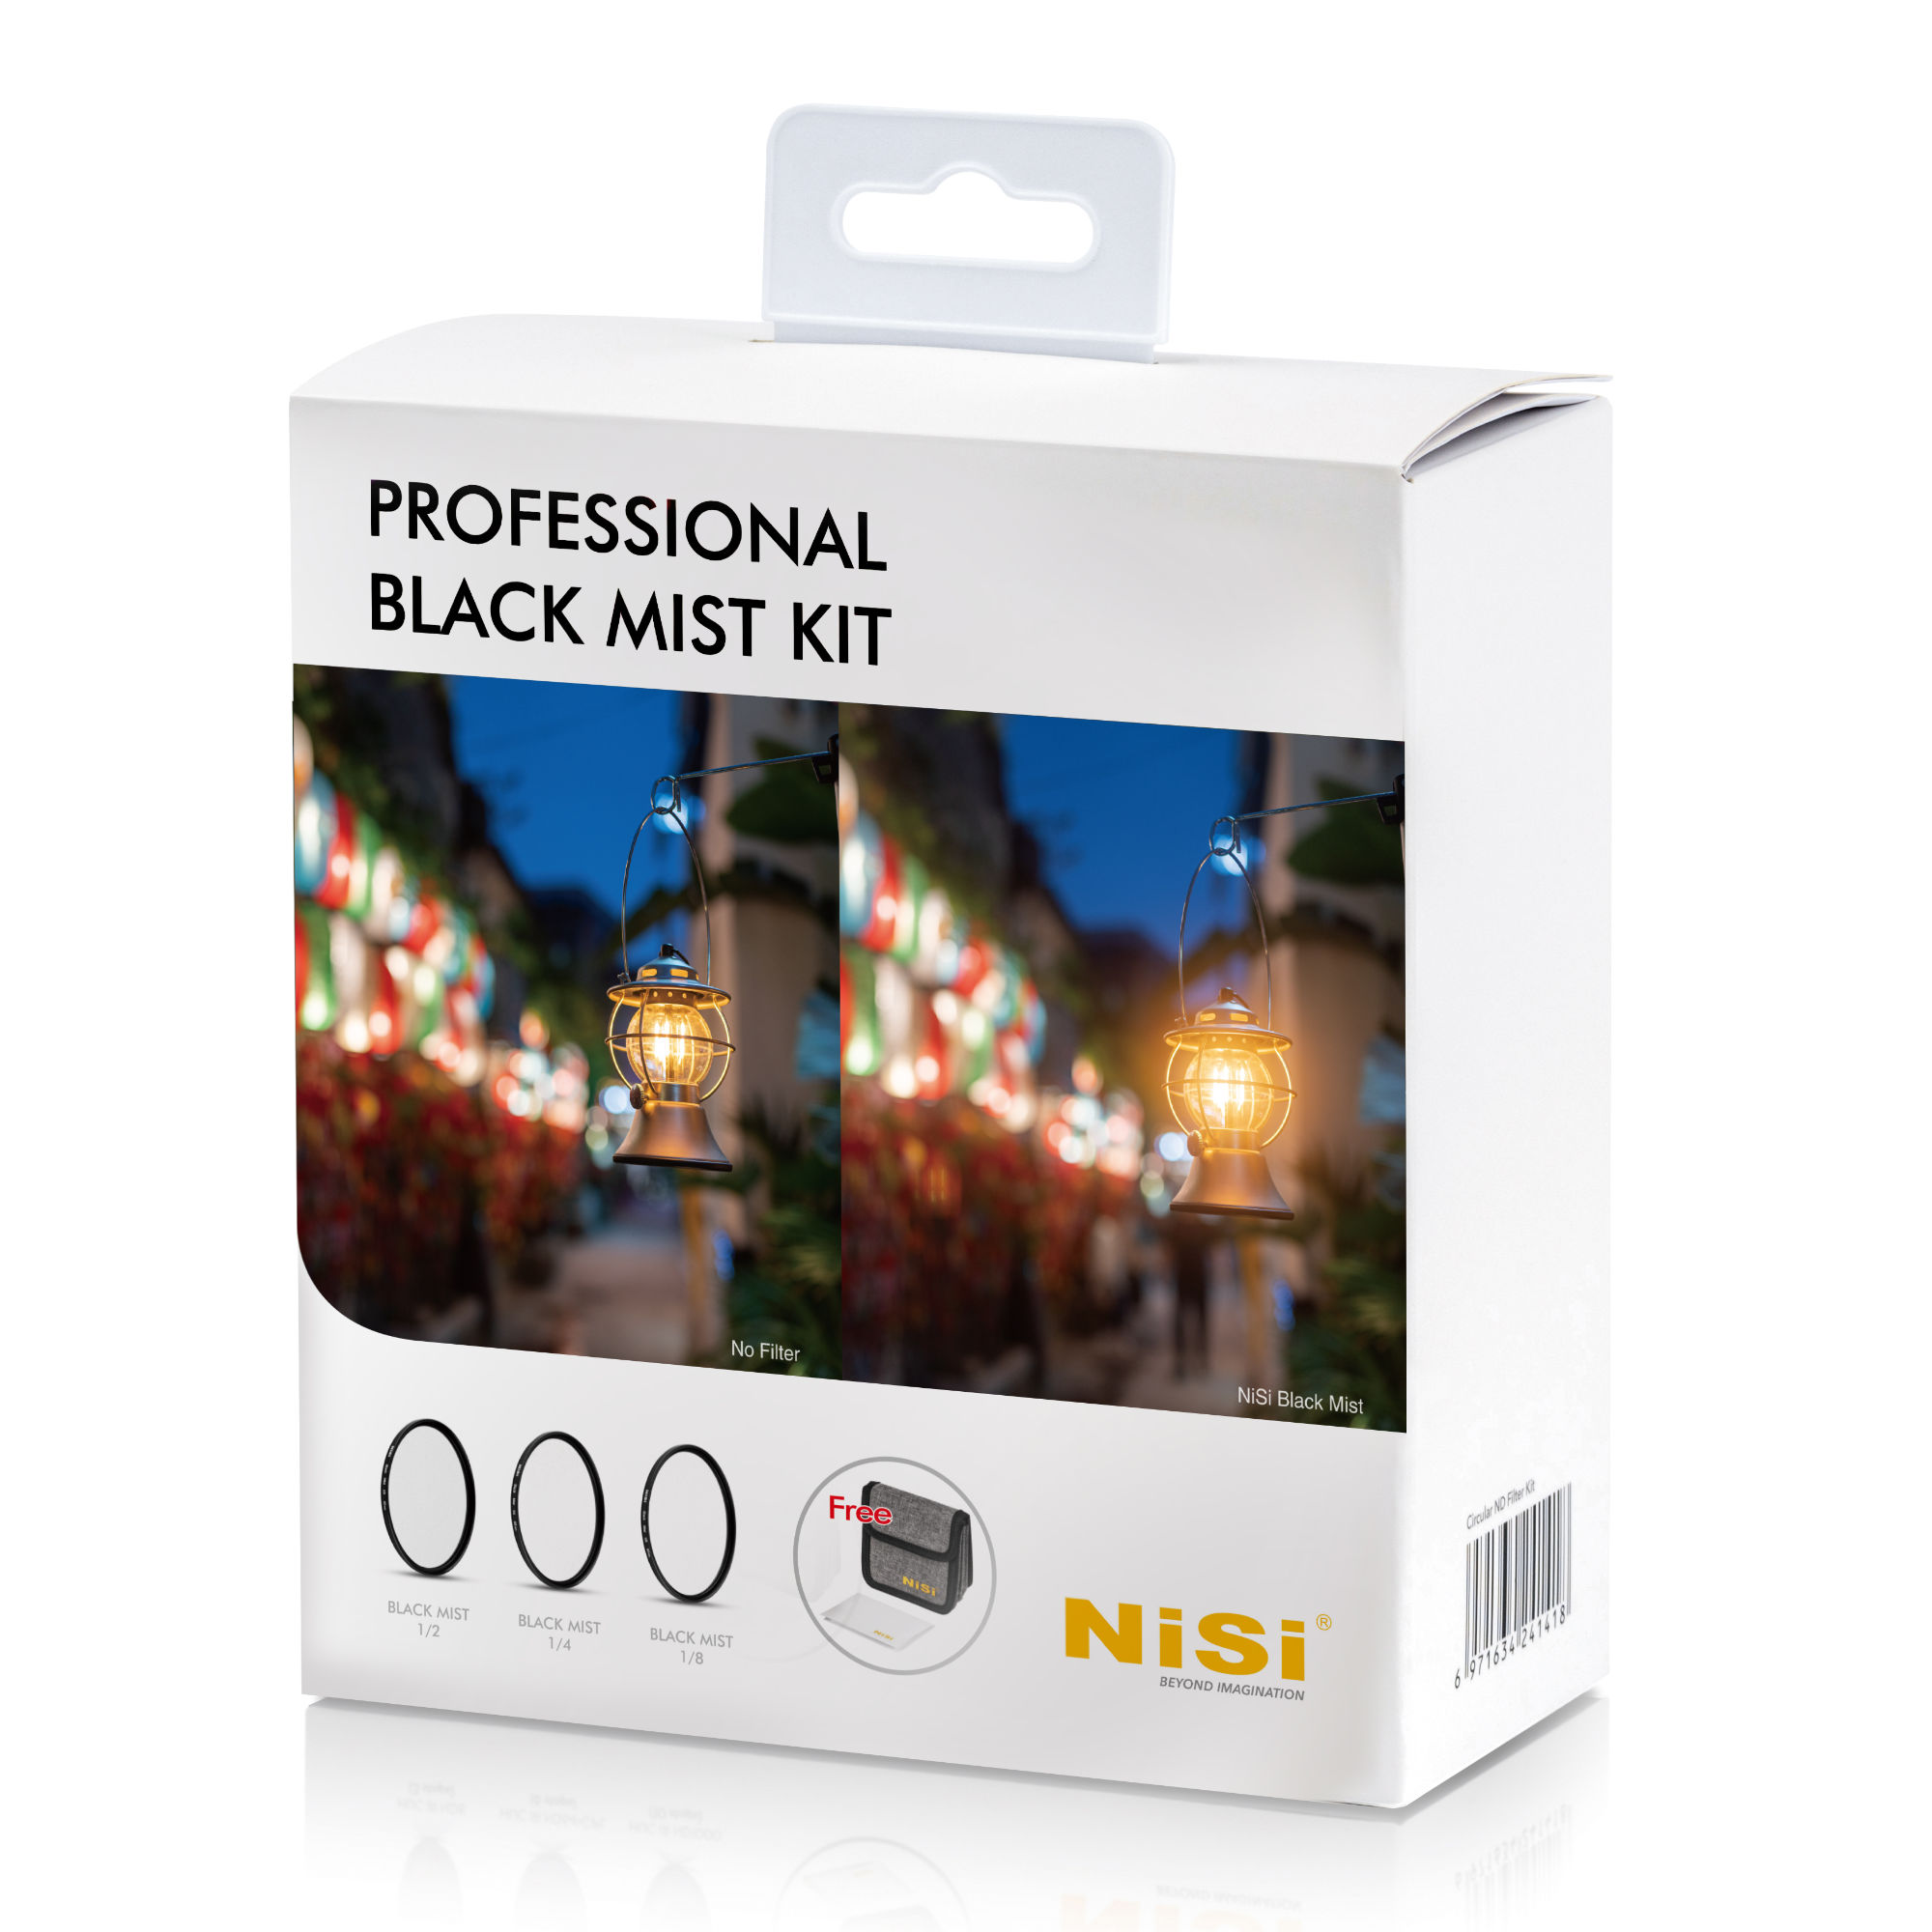 NiSi 52mm Professional Black Mist Kit with 1/2, 1/4, 1/8 and Case